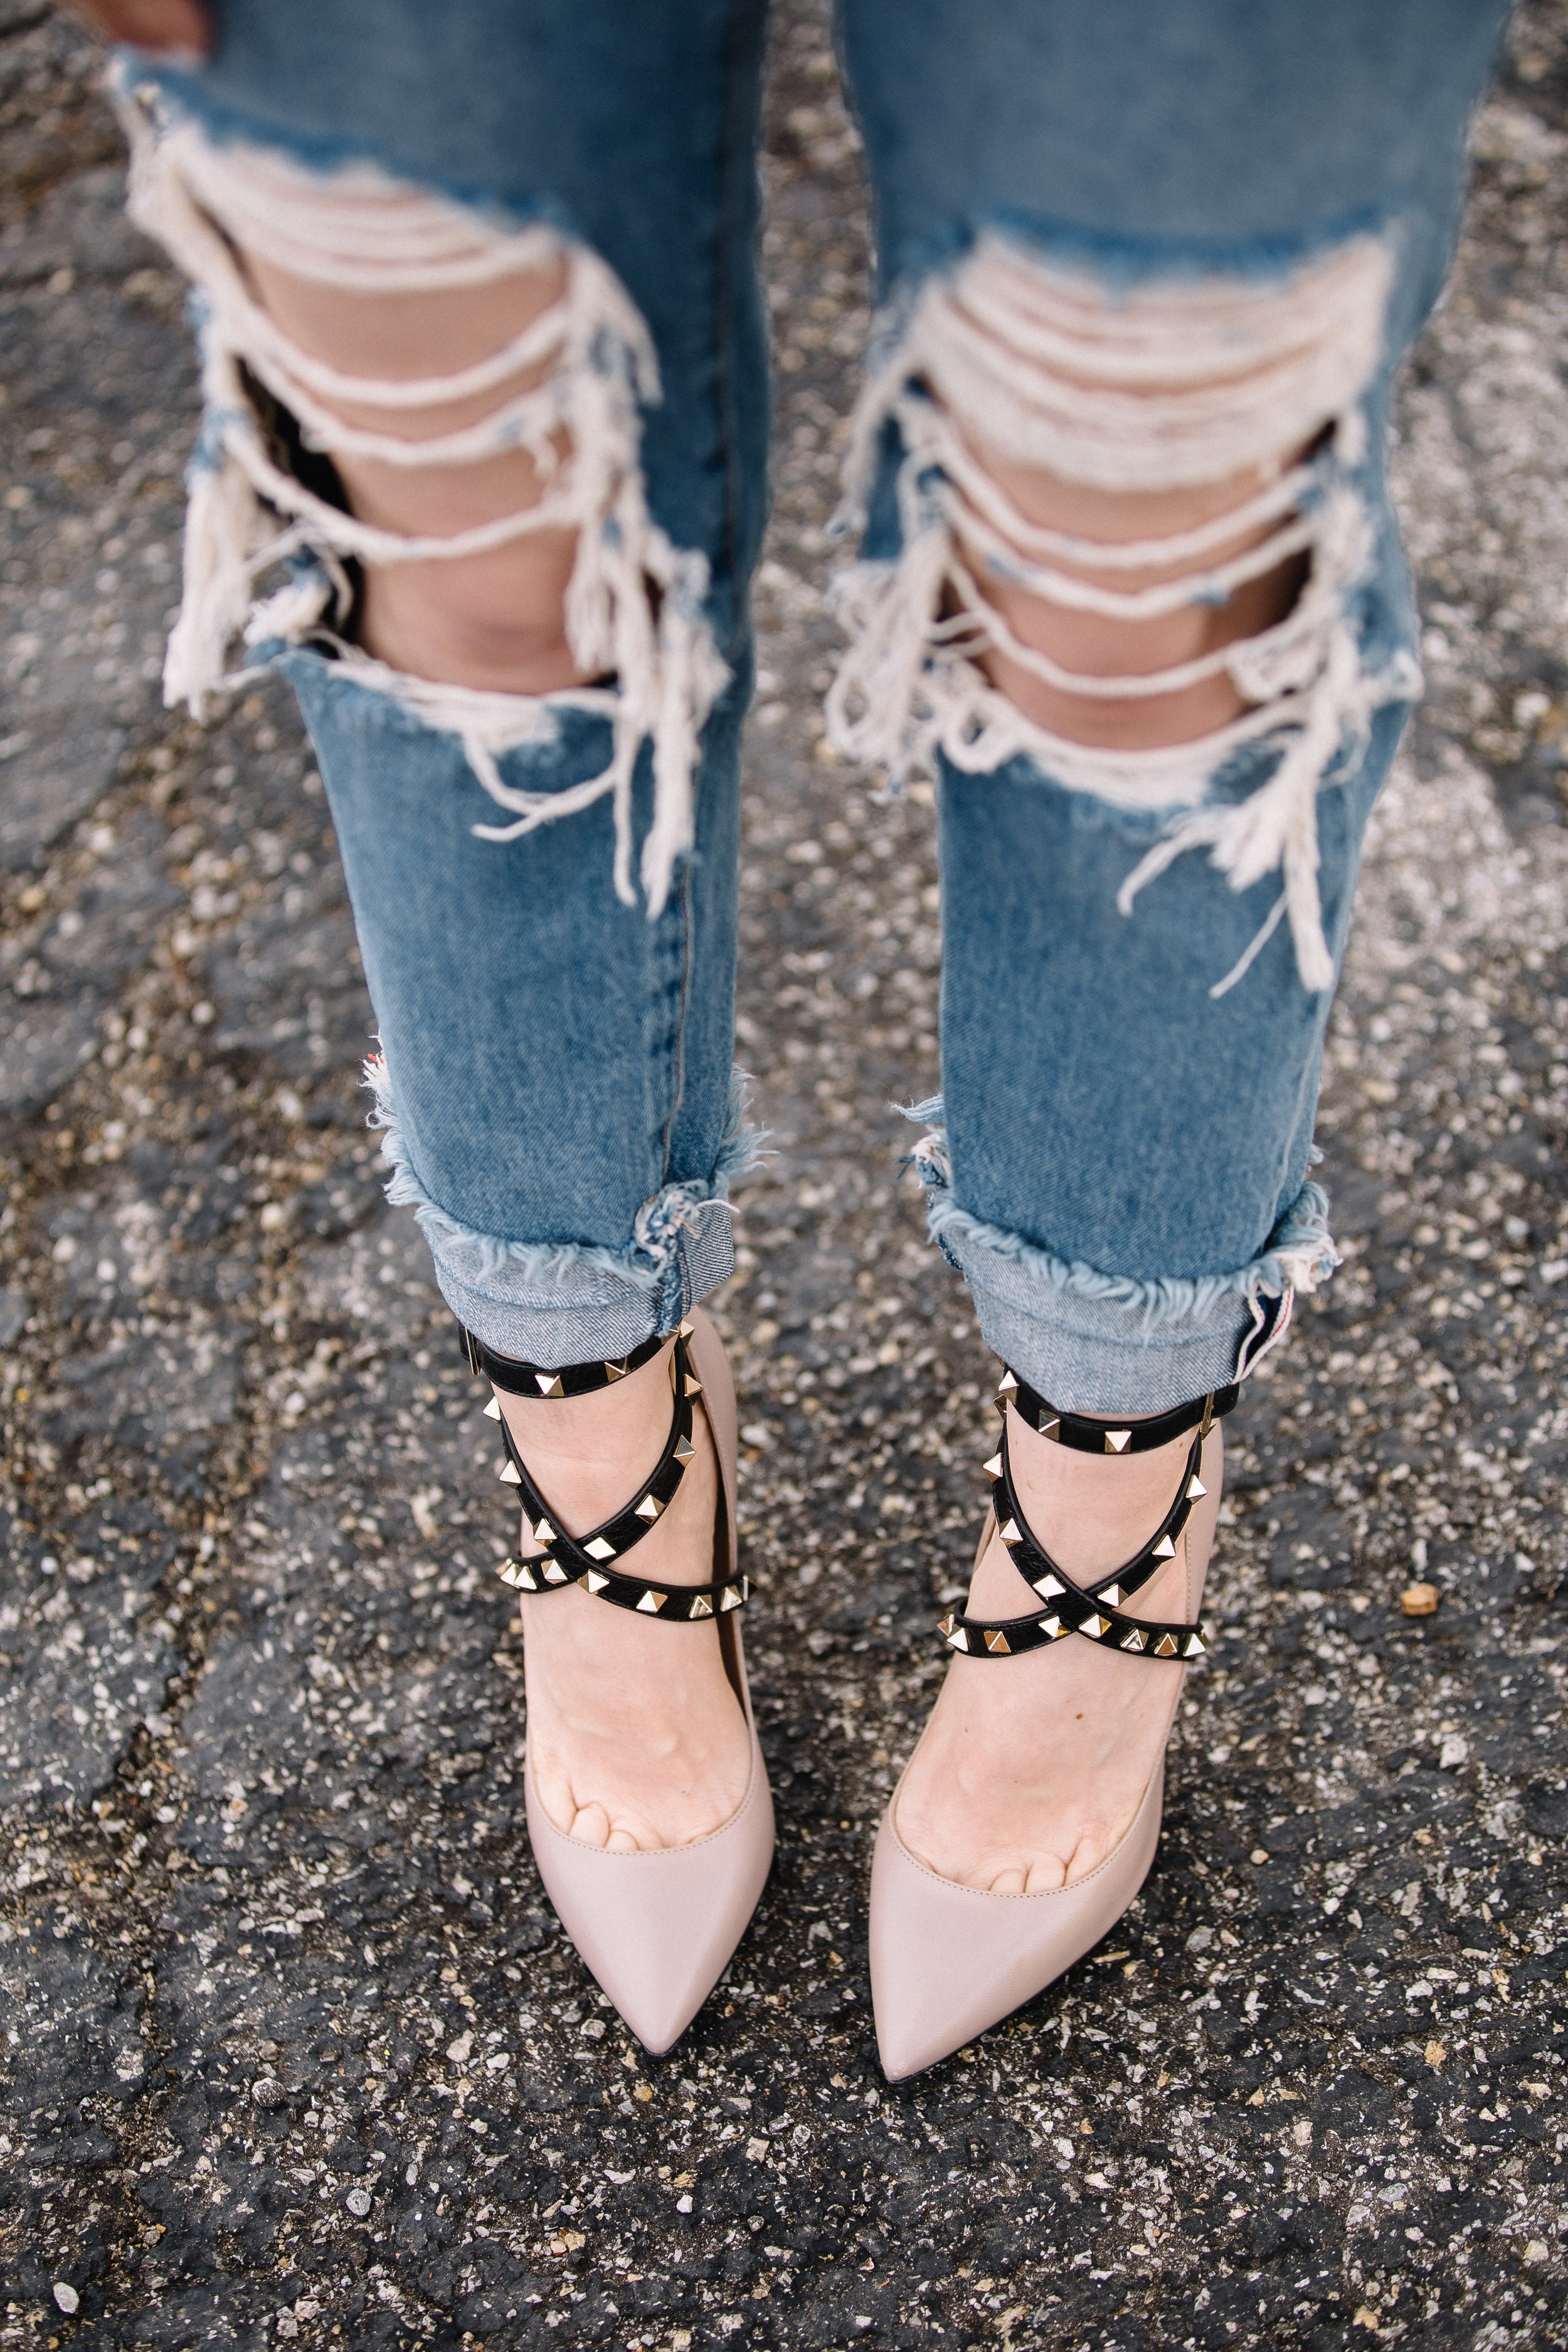 rock studs and ripped jeans.jpg